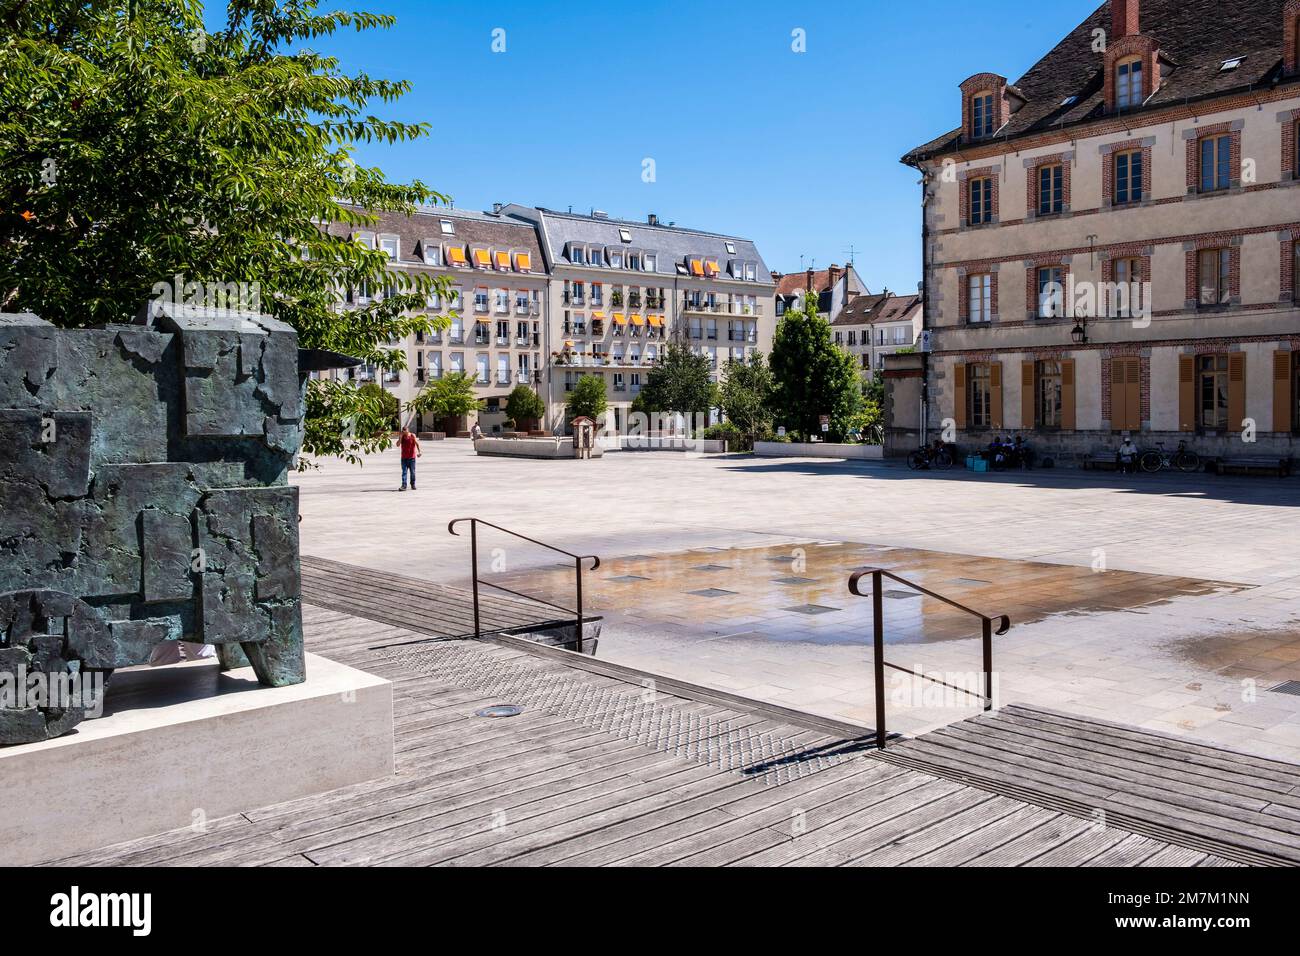 Fontainebleau (Paris area, France): "place du marche" square in the city centre. Building facades giving onto the pedestrianized square the tourist of Stock Photo